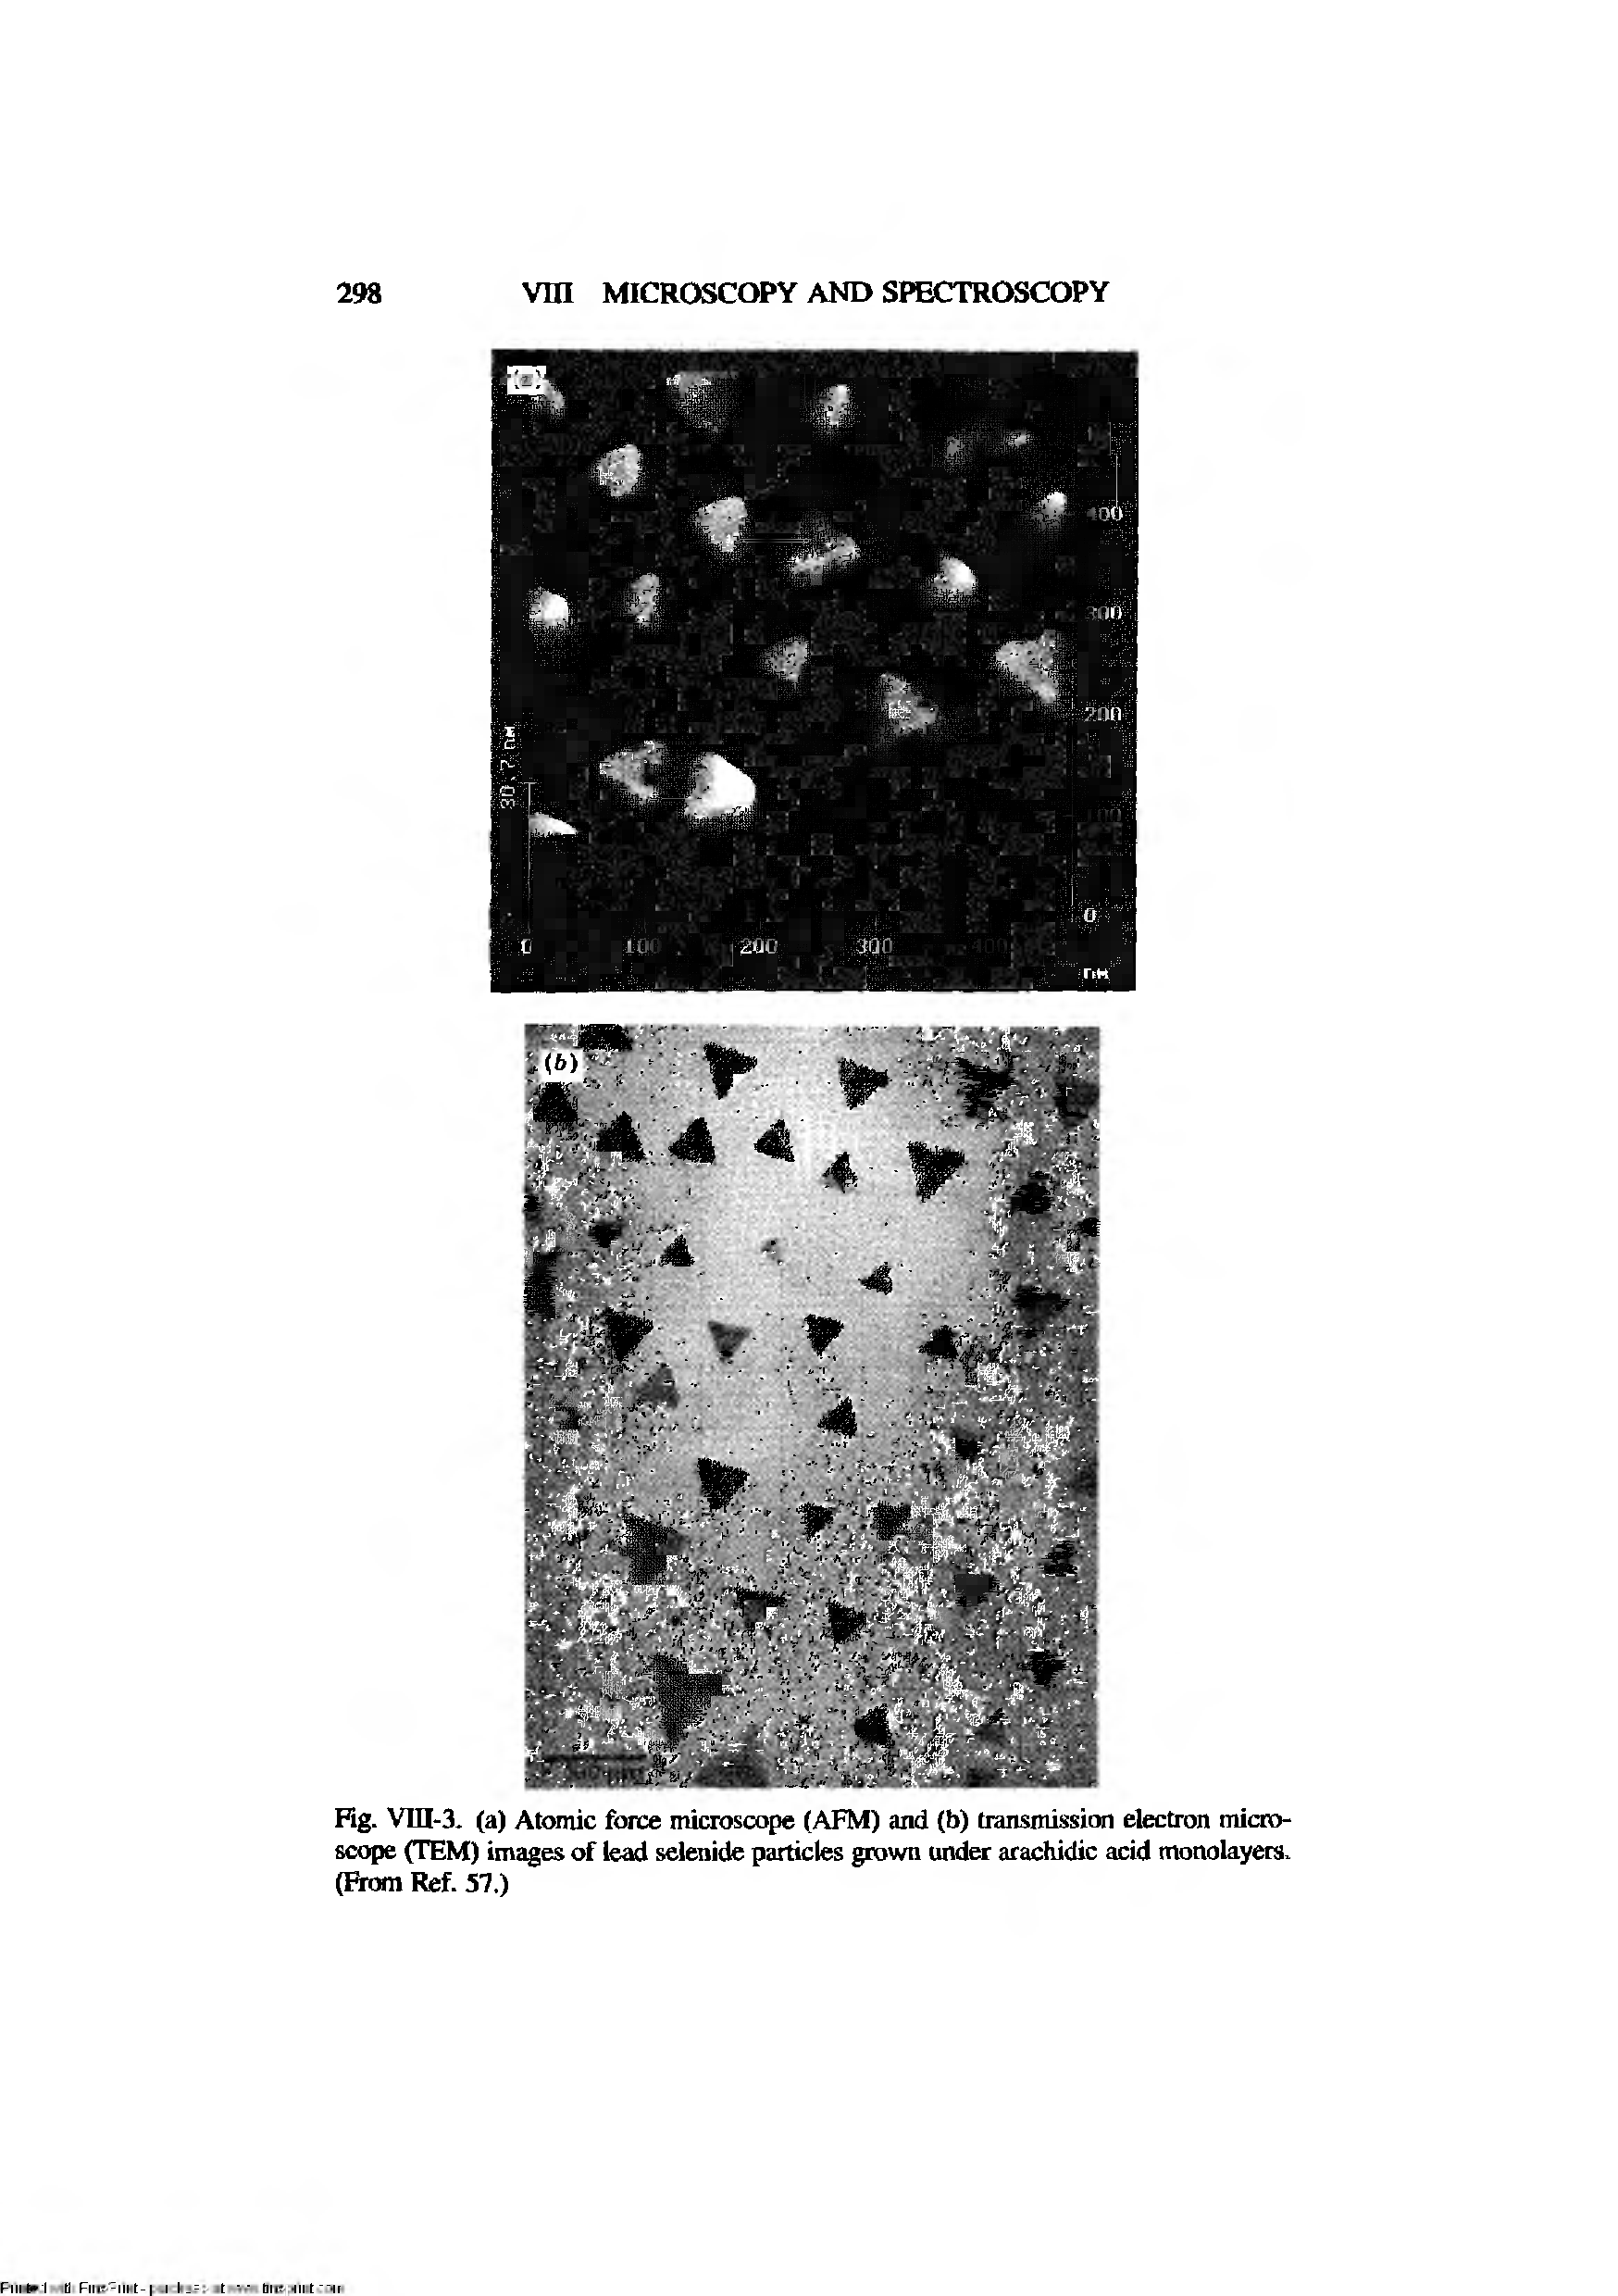 Fig. Vni-3. (a) Atomic force microscope (AFM) and (b) transmission electron microscope (TEM) images of lead selenide particles grown under arachidic acid monolayers. (Pi Ref. 57.)...